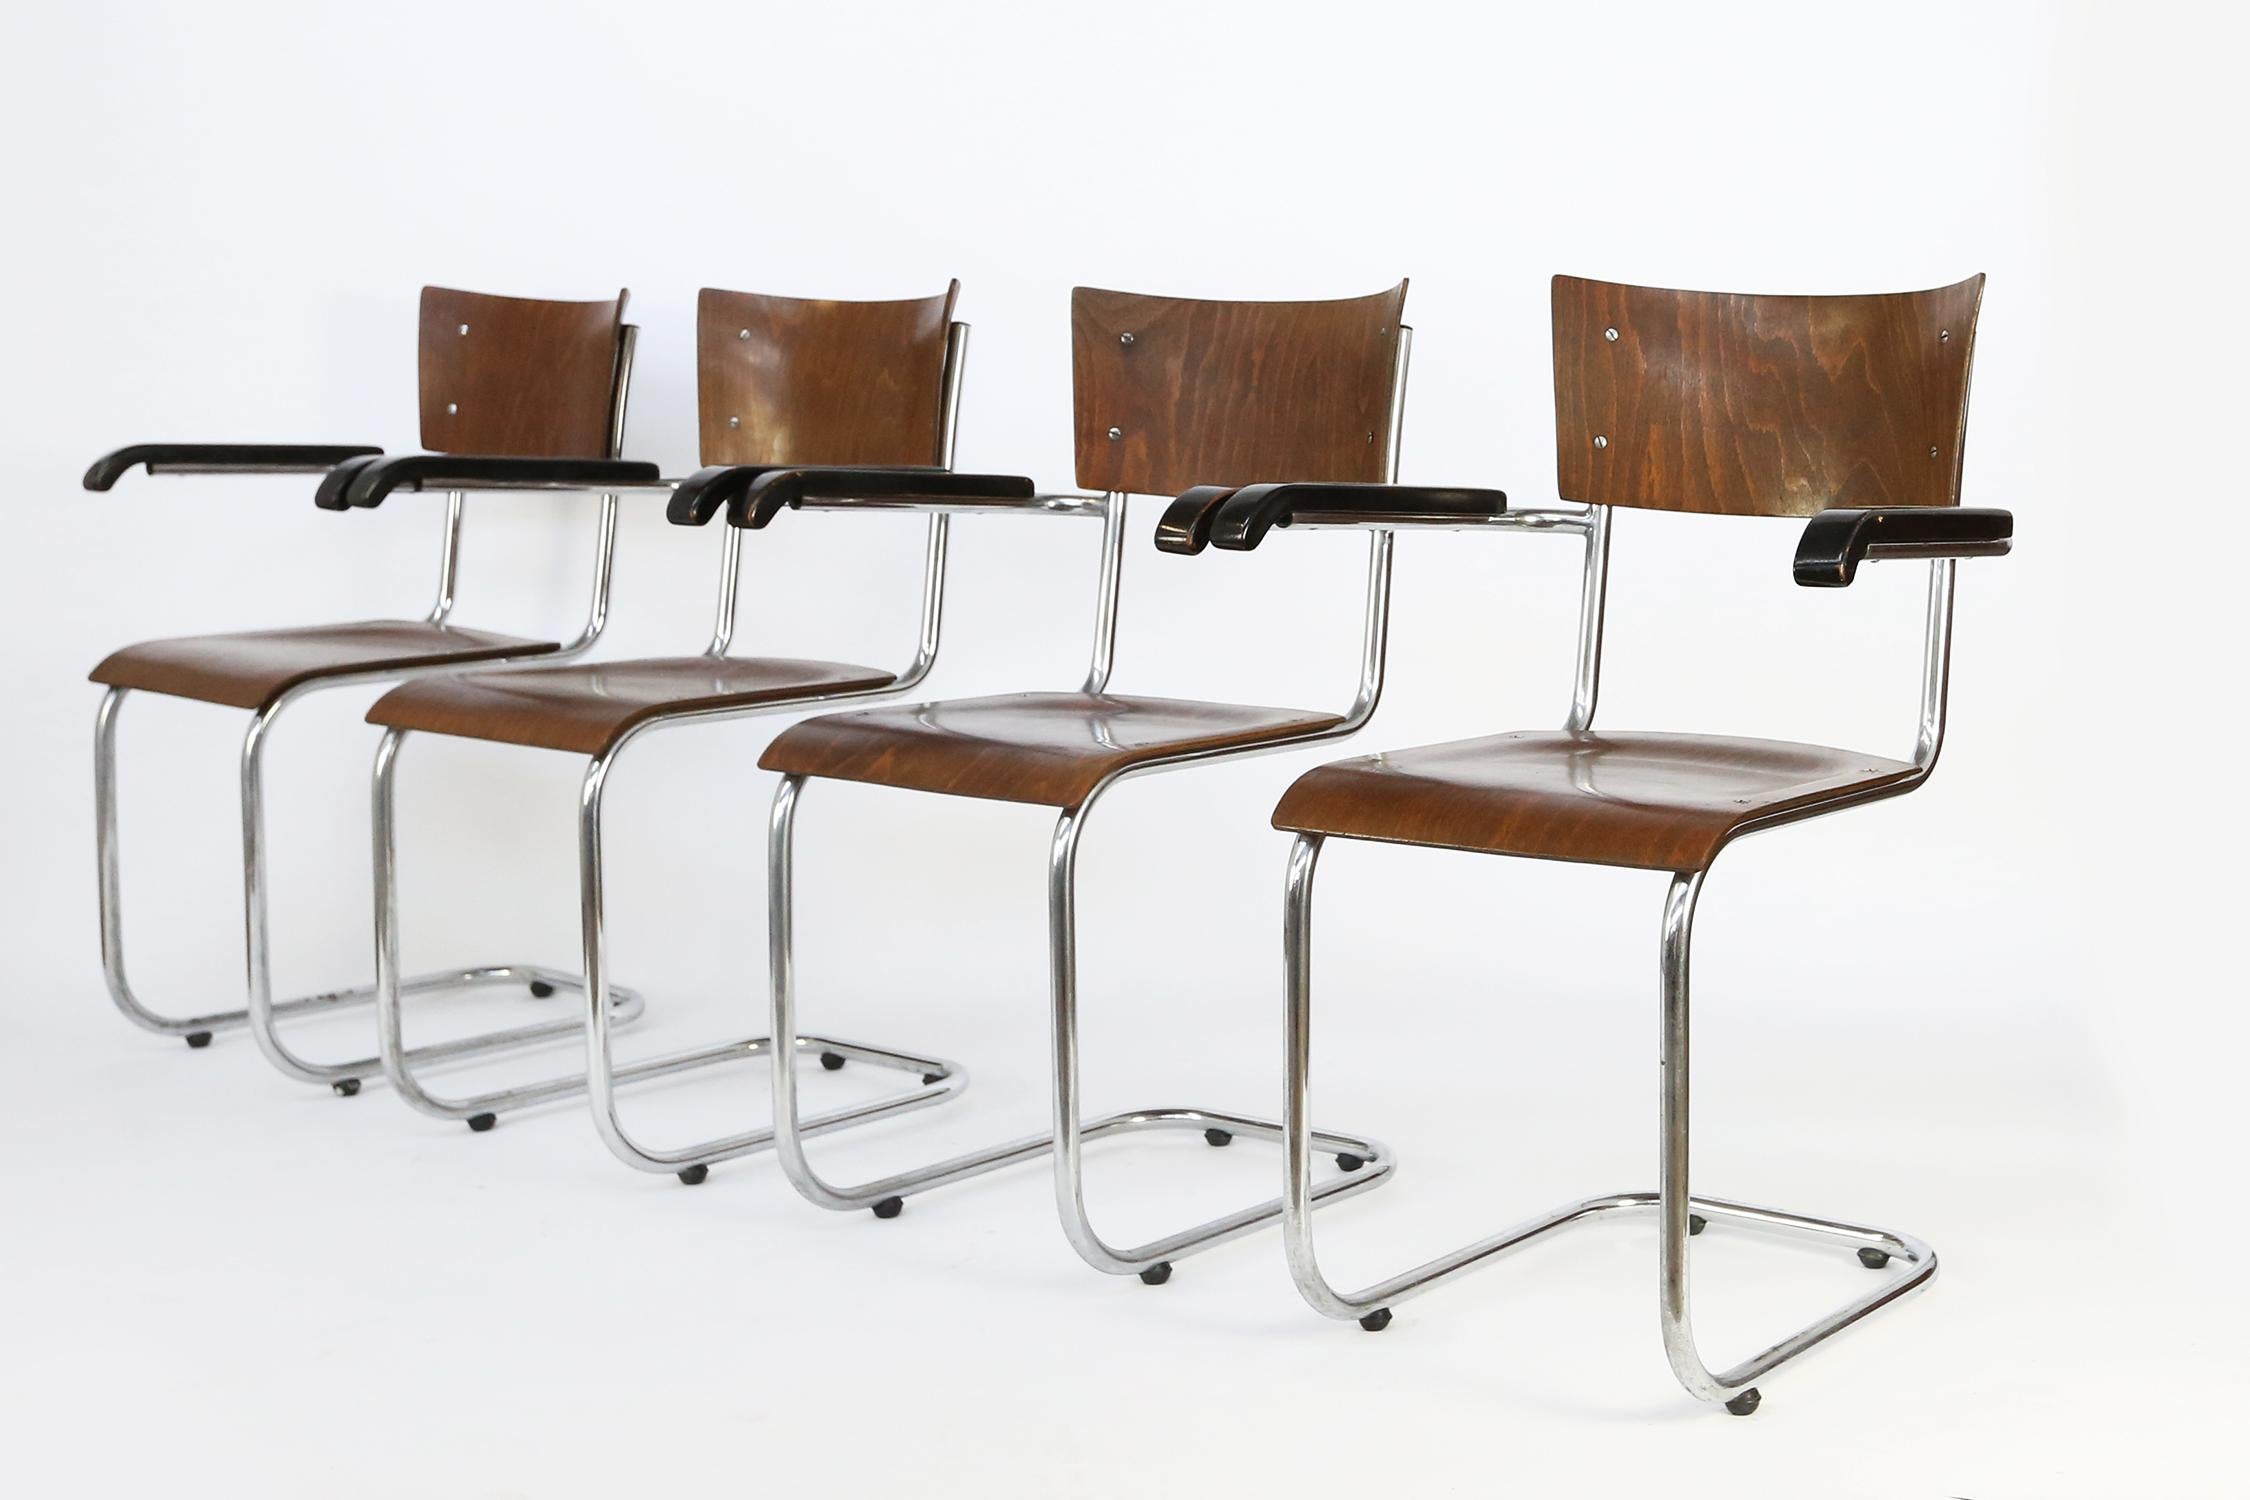 A set of 4 bauhaus cantilever armchairs designed in late 1920s, simultaneously, by Mart Stam, Marcel Breuer and Ludwig Mies van der Rohe.
These ones, by Mart Stam for Thonet features a frame in chrome-plated tubular metal in original condition and